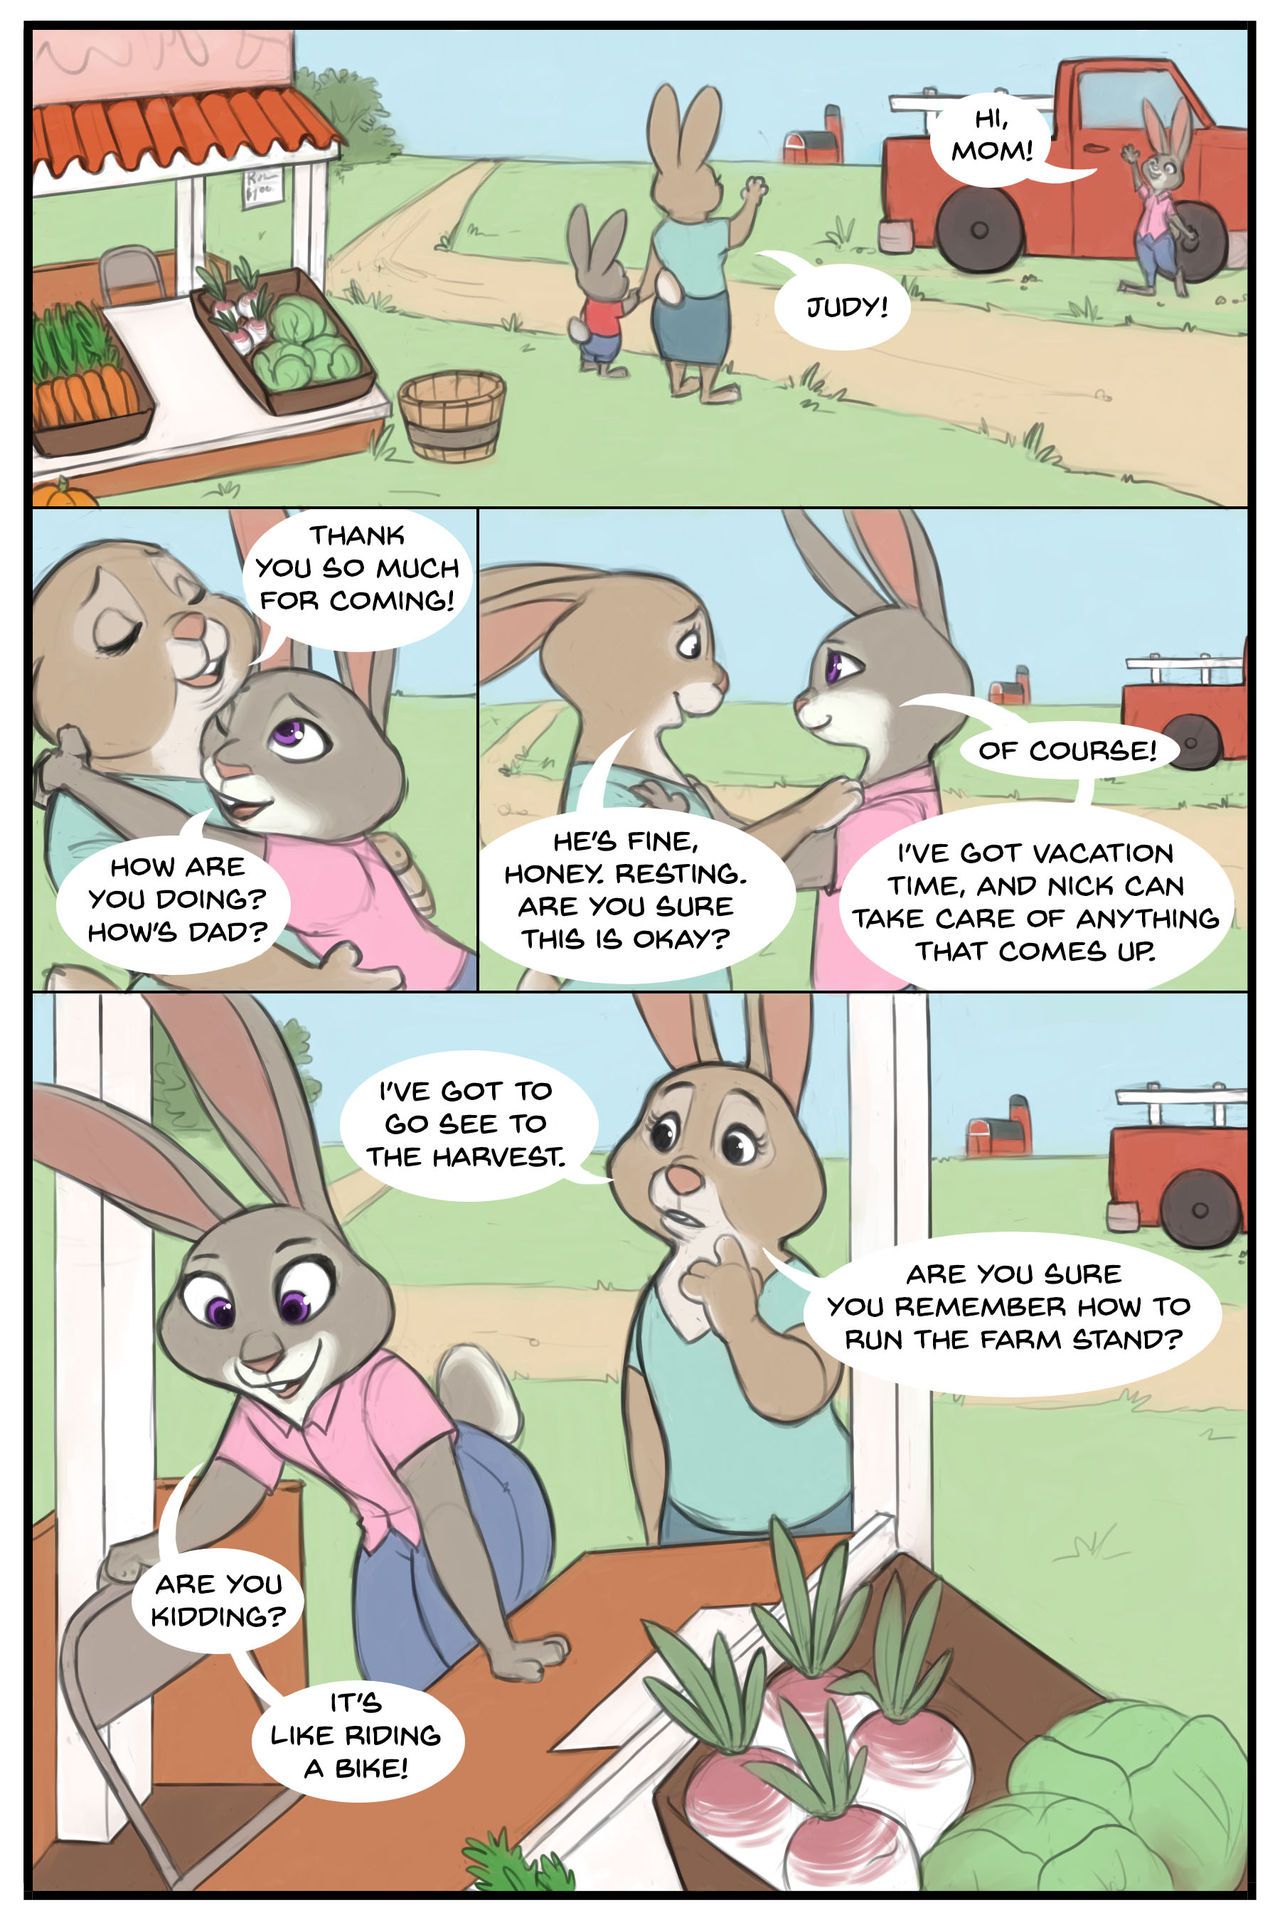 Don't Know When to Quit (Zootopia) 2